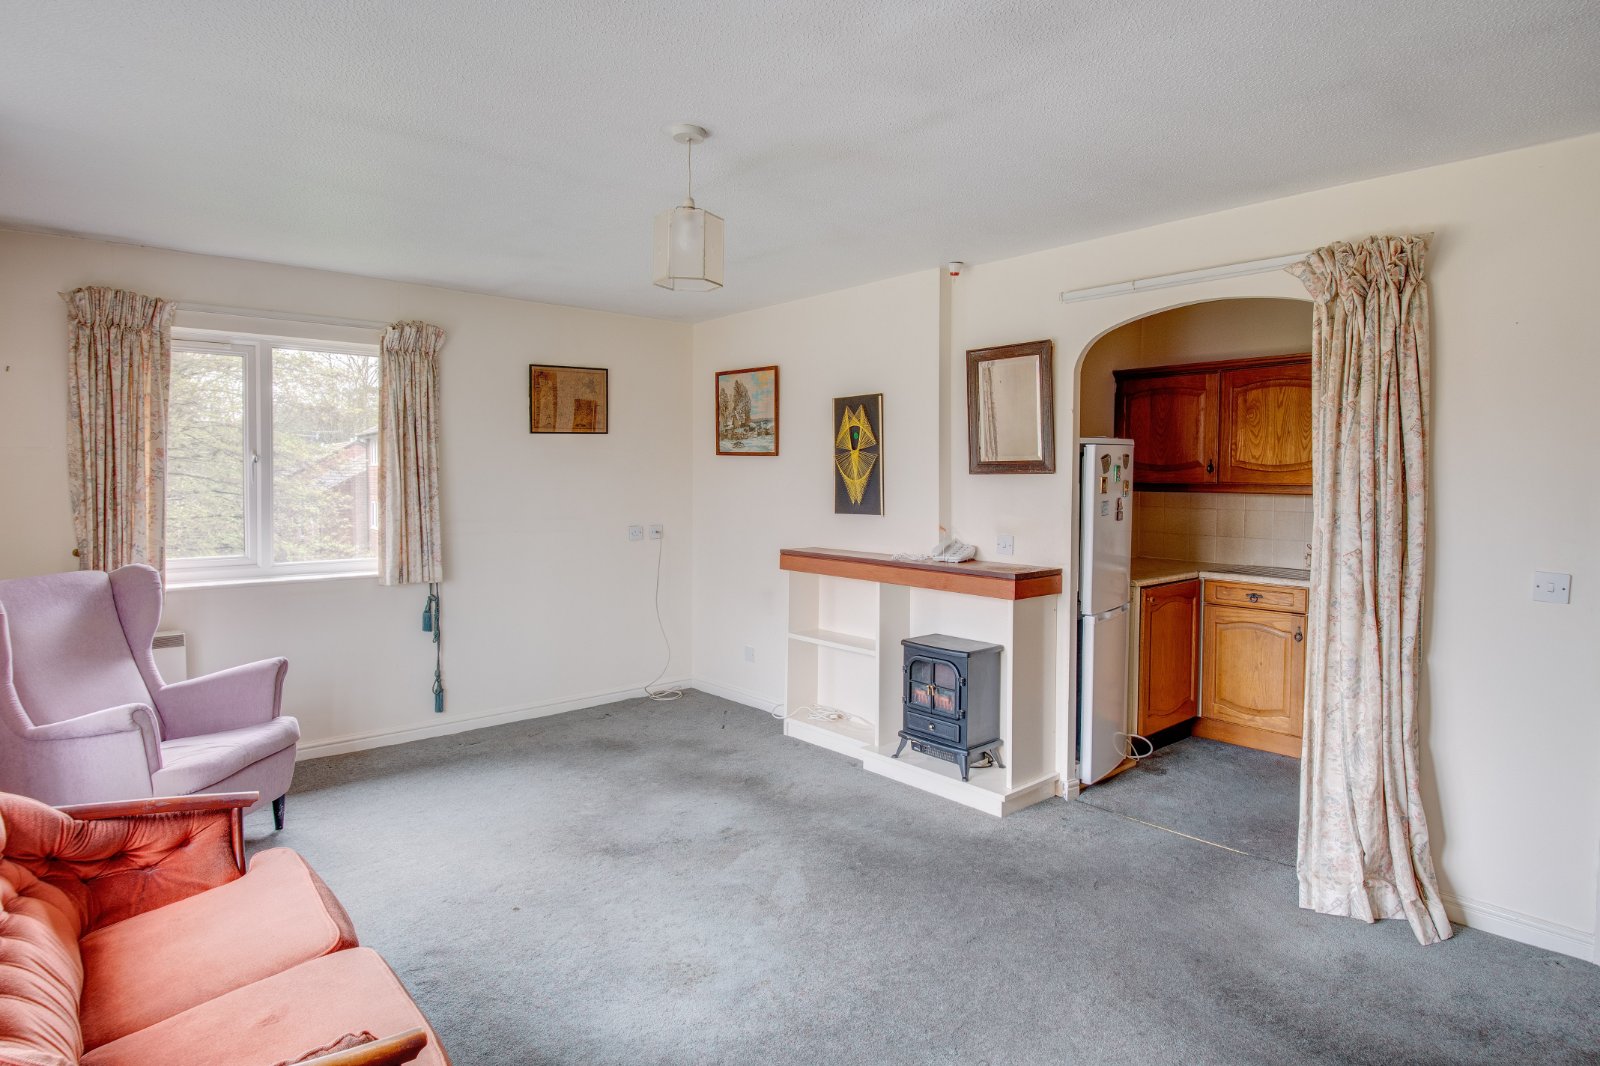 1 bed  for sale in Housman Park, Bromsgrove 3